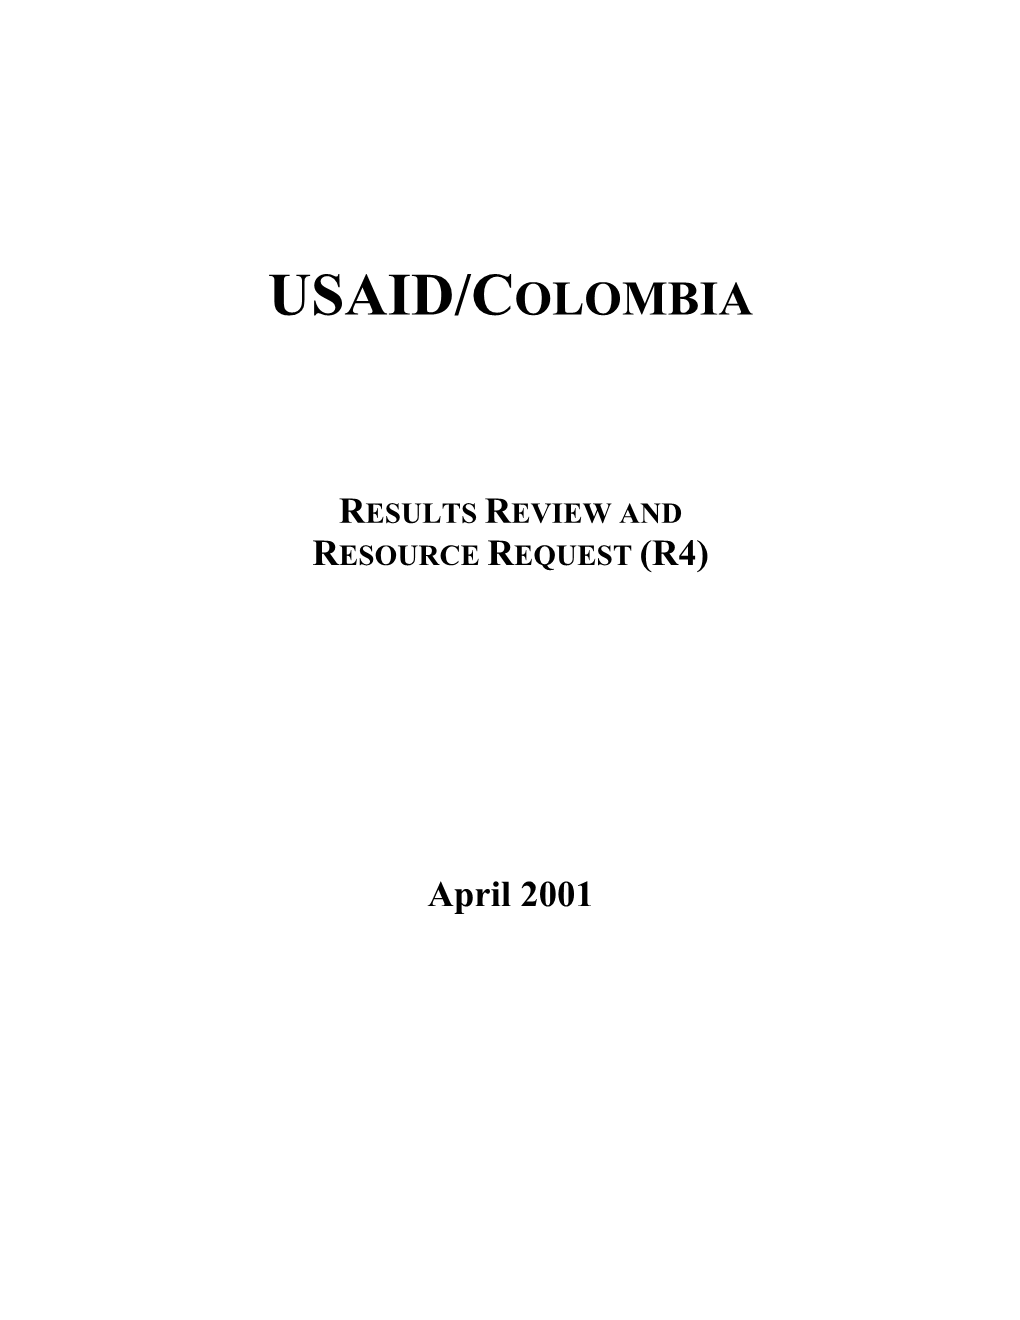 Usaid/Colombia